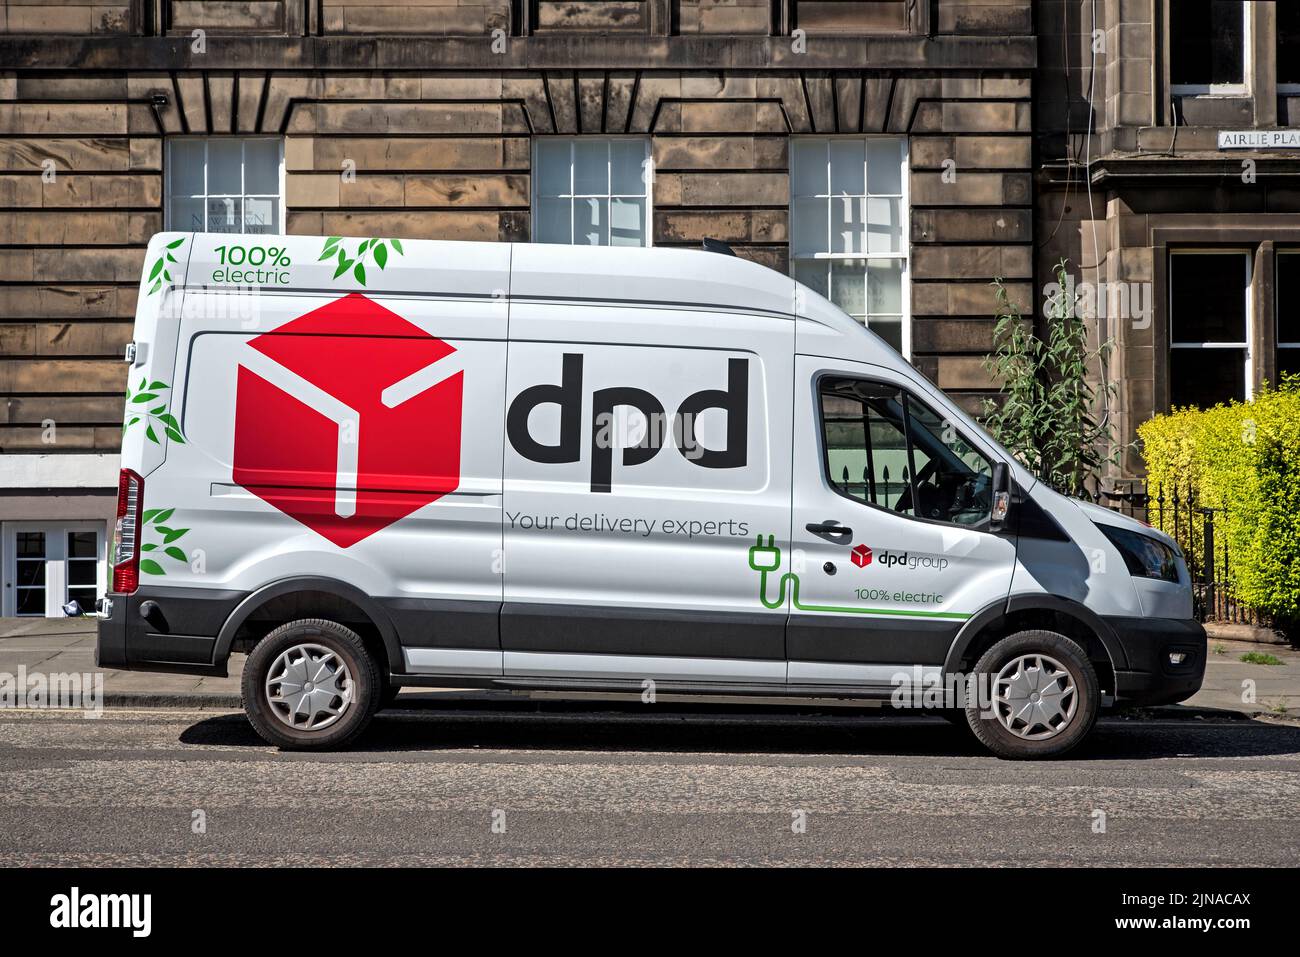 100% Electric dpd delivery van parked in a street in Edinburgh, Scotland, UK. Stock Photo